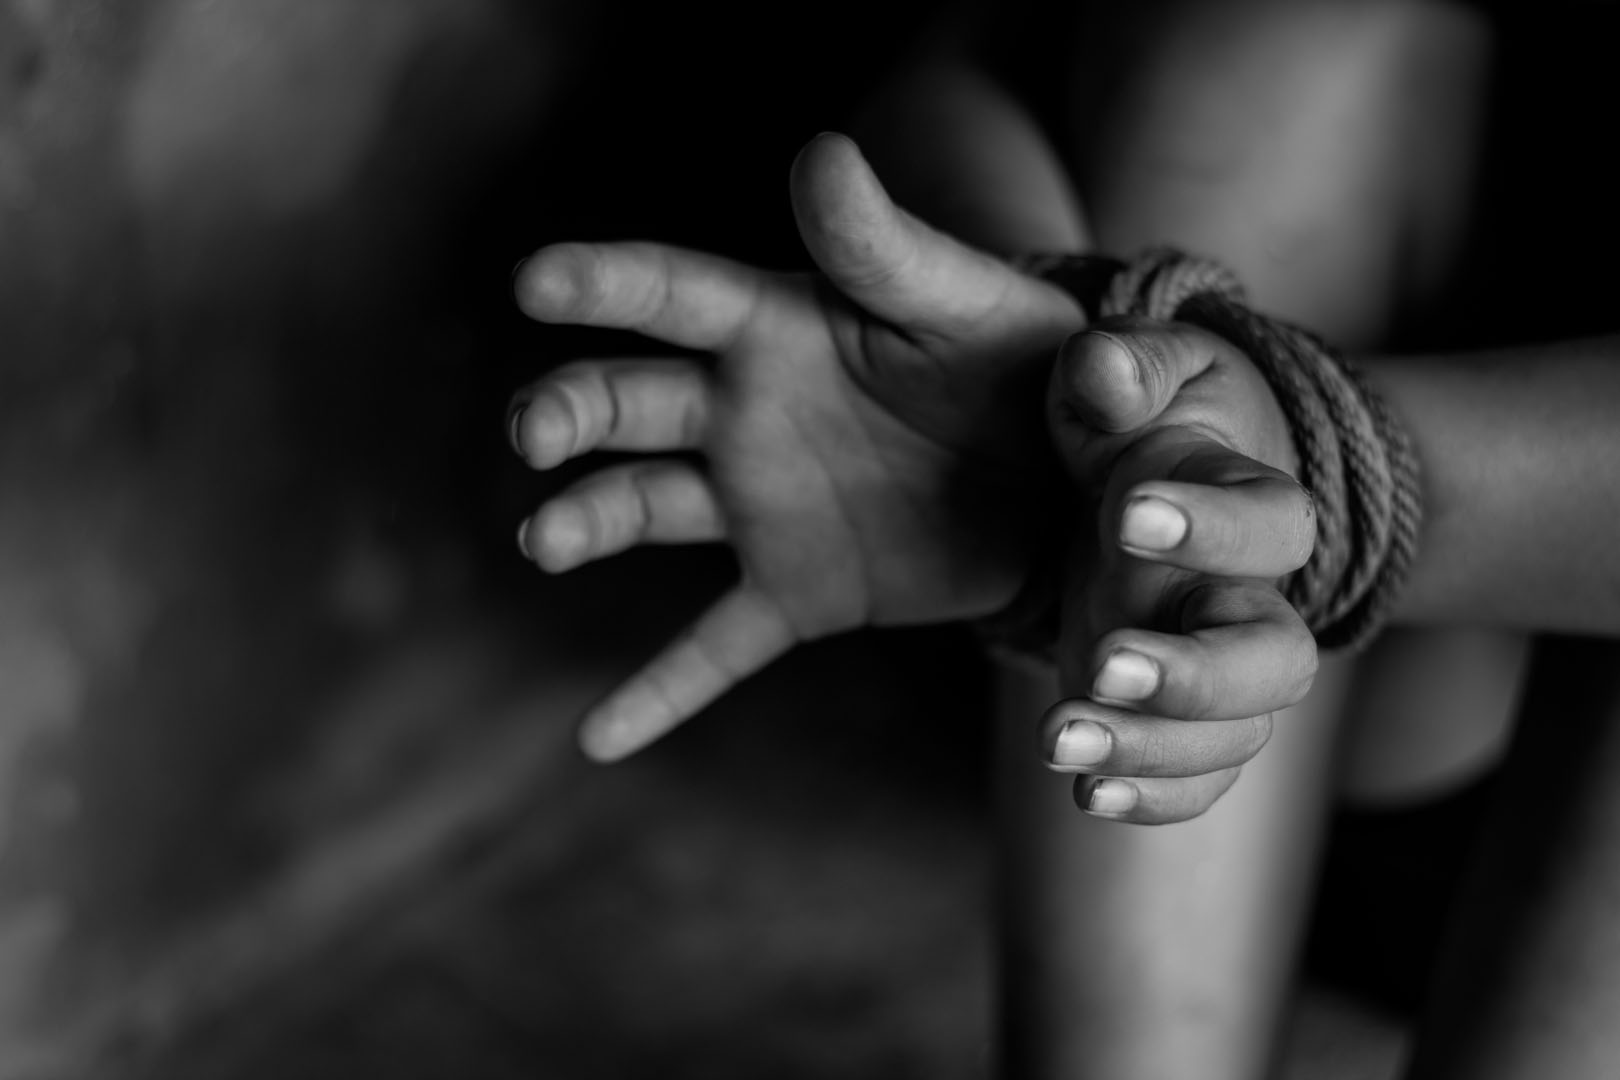 Featured image for “Trafficking”